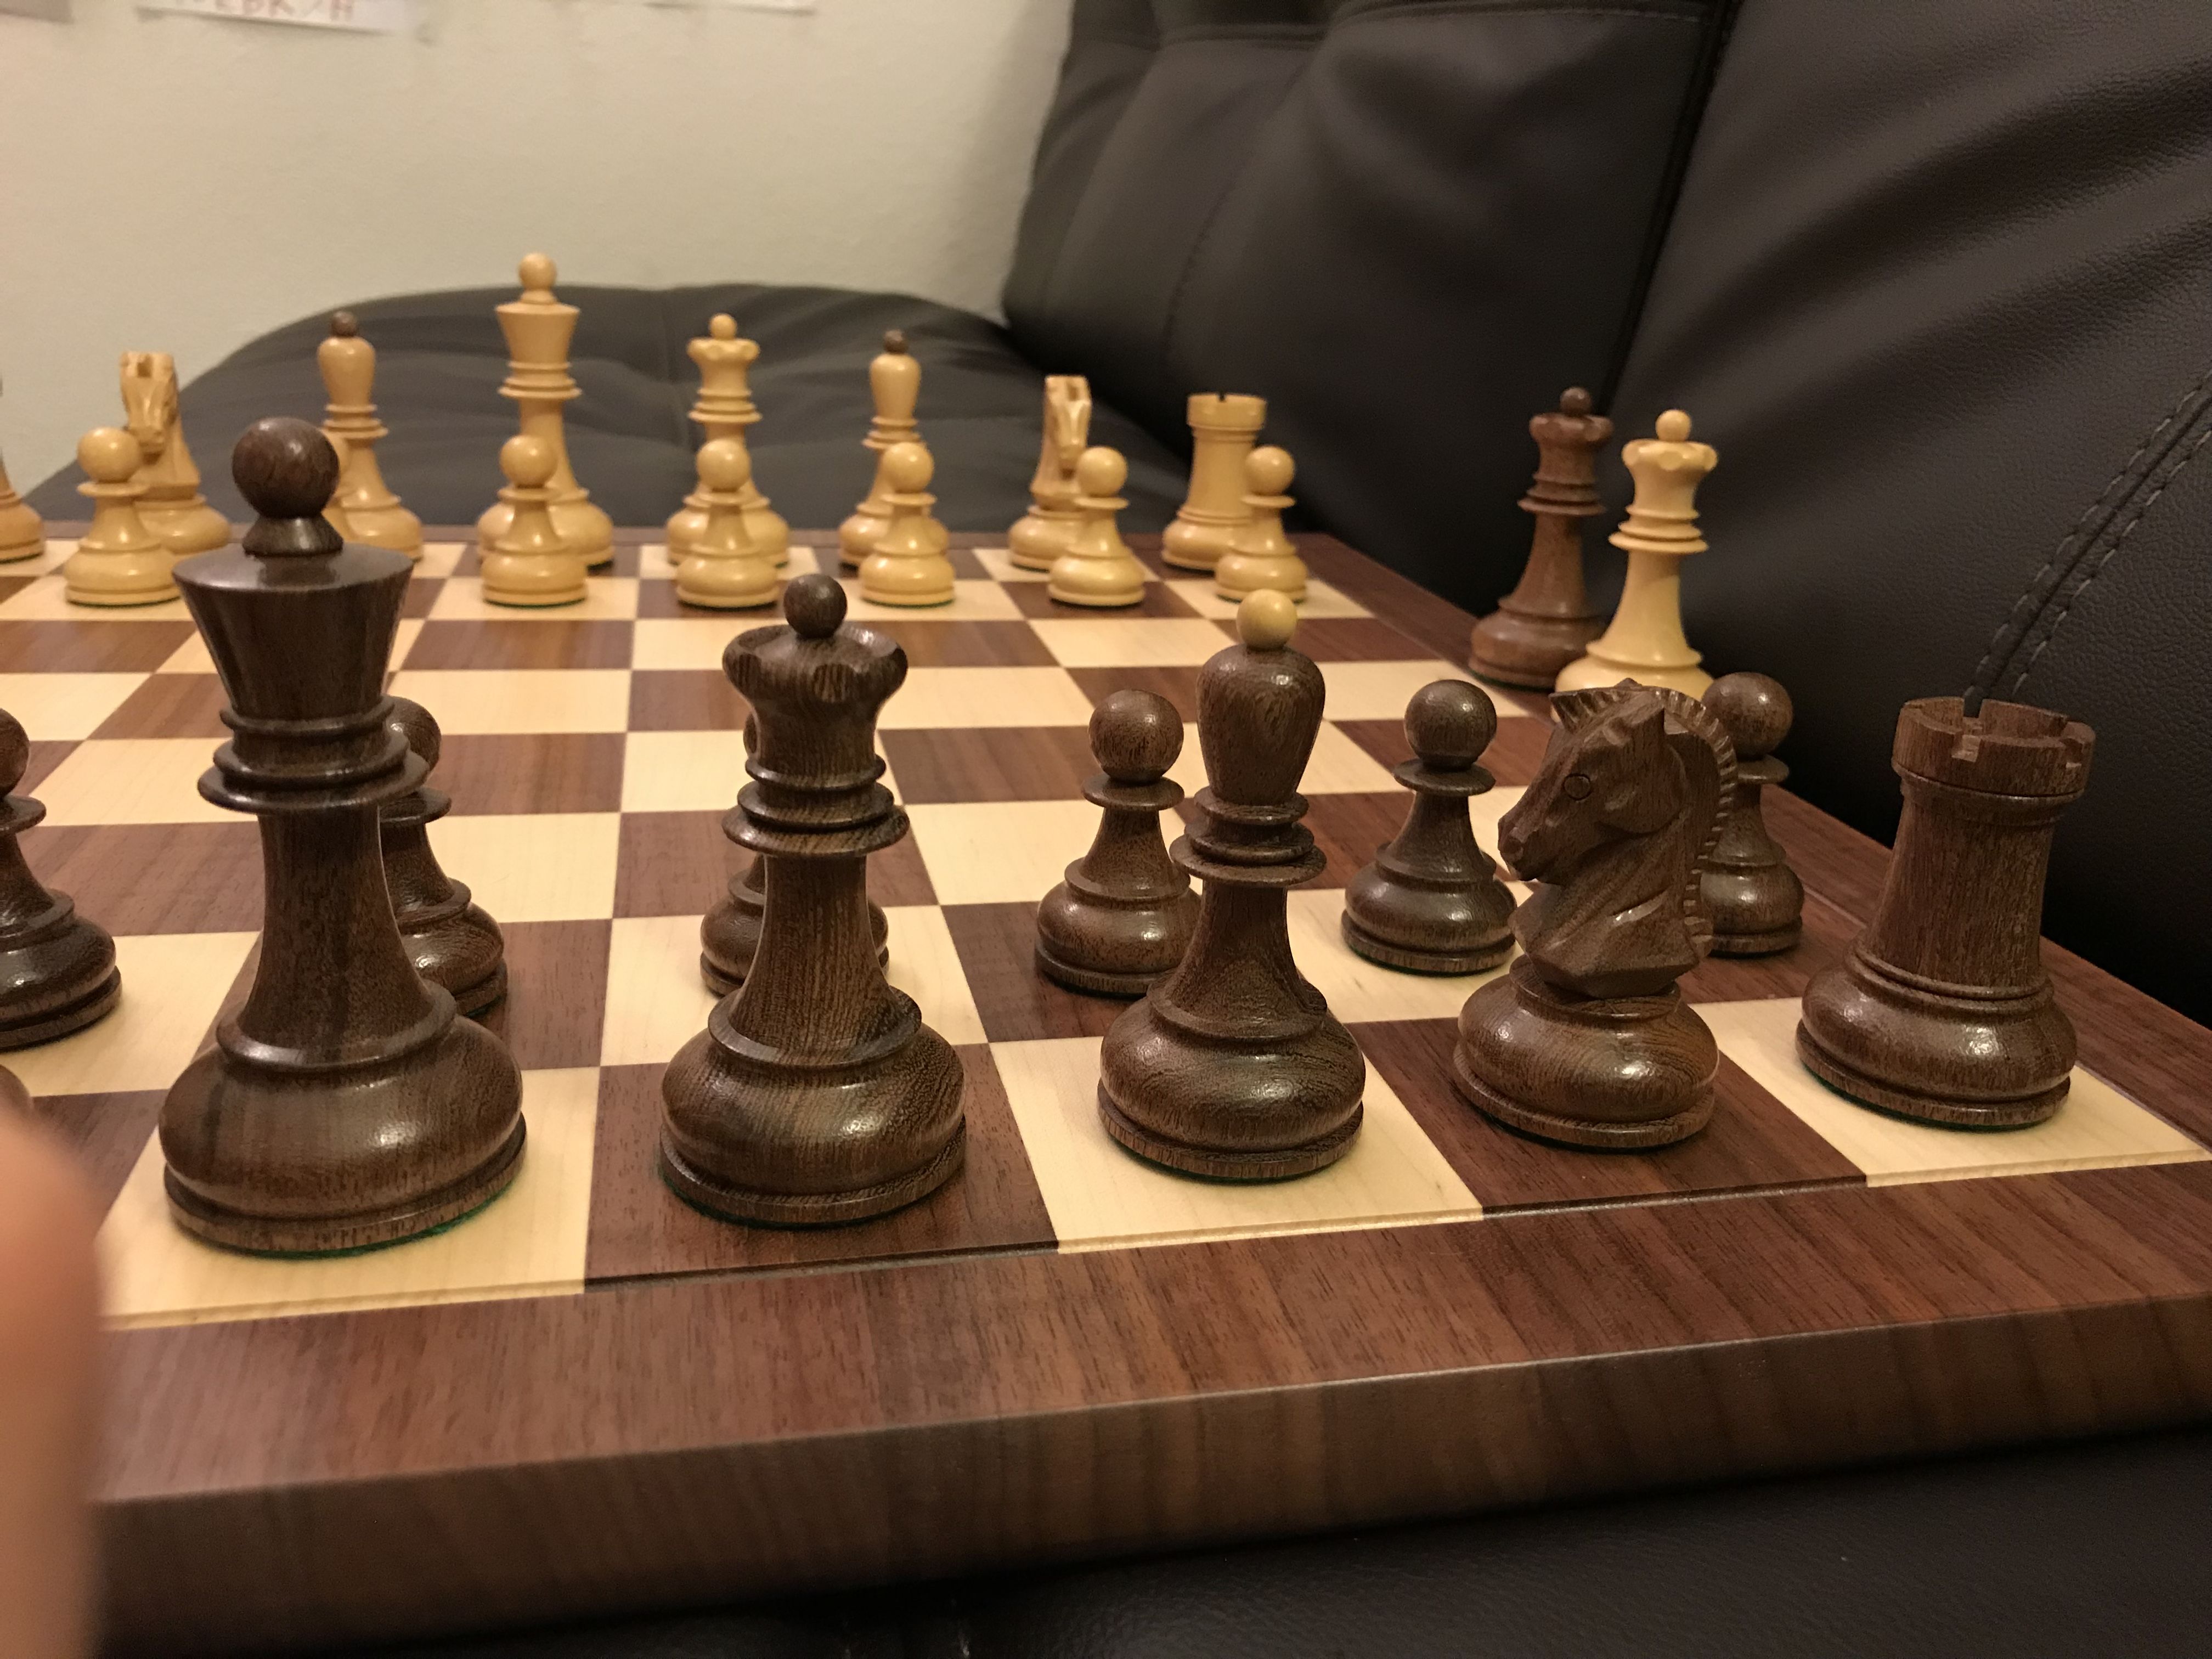 Jlp Woodworking Chess Boards? - Chess Forums - Page 2 - Chess.Com